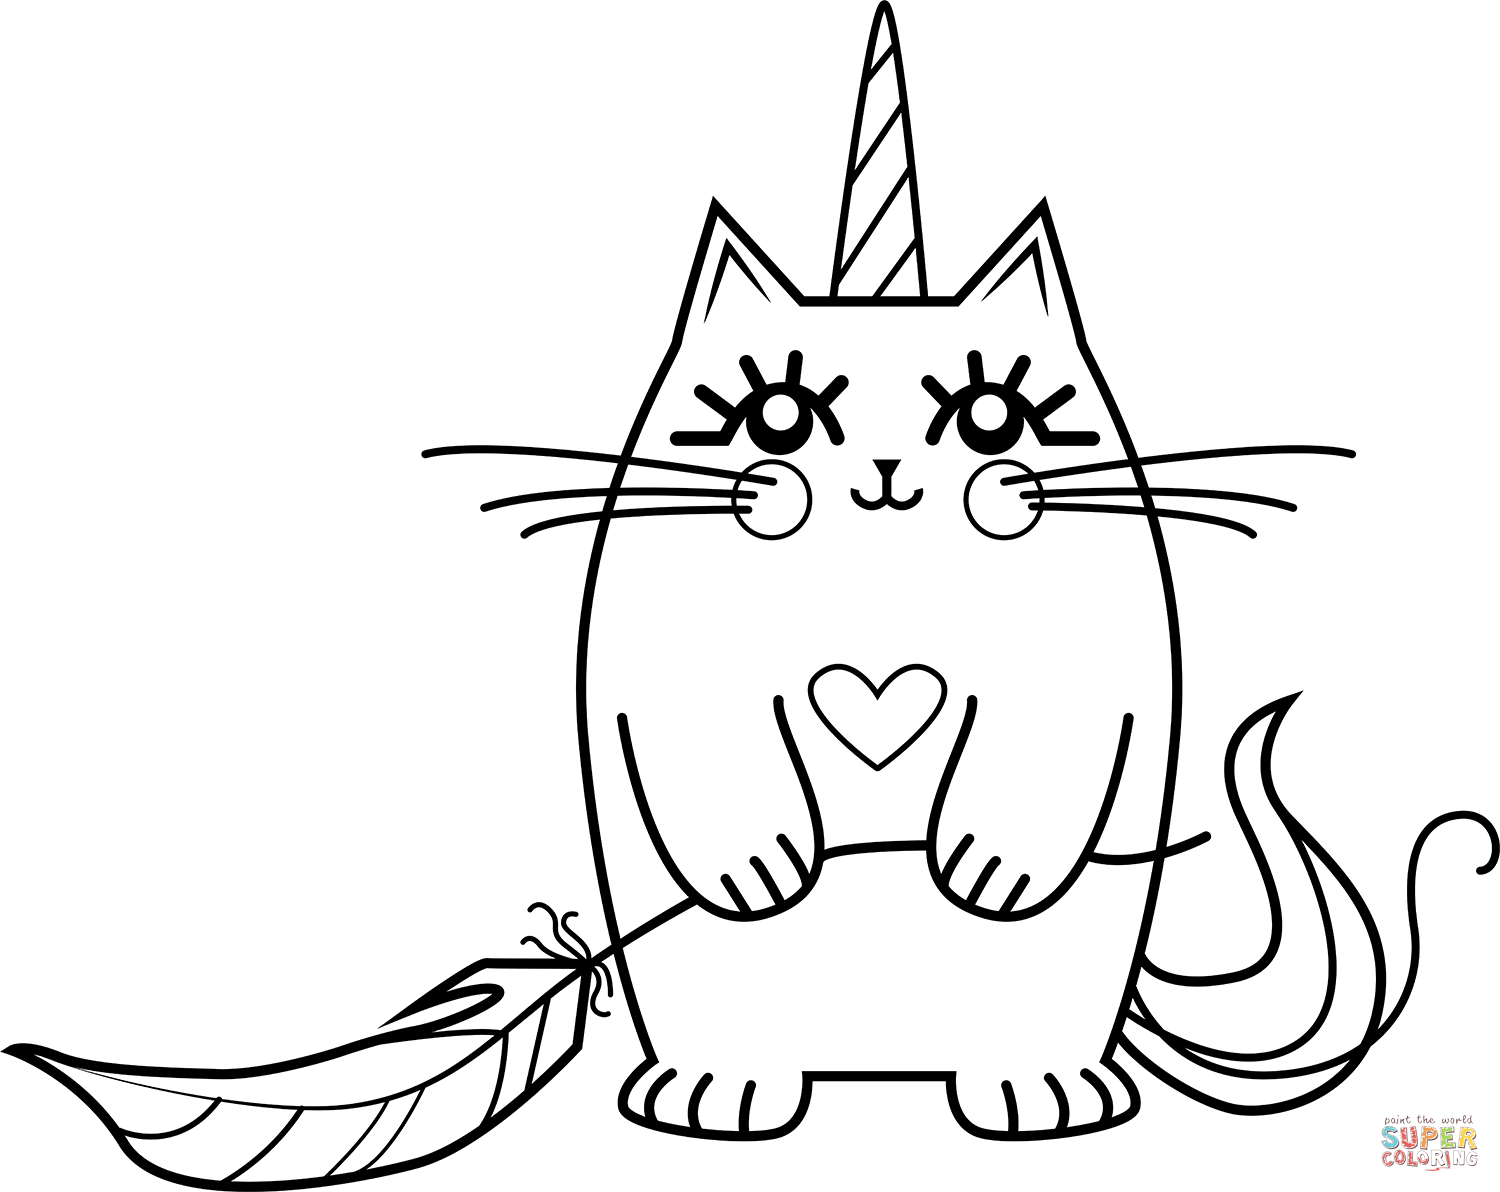 Cat Unicorn coloring page | Free ...